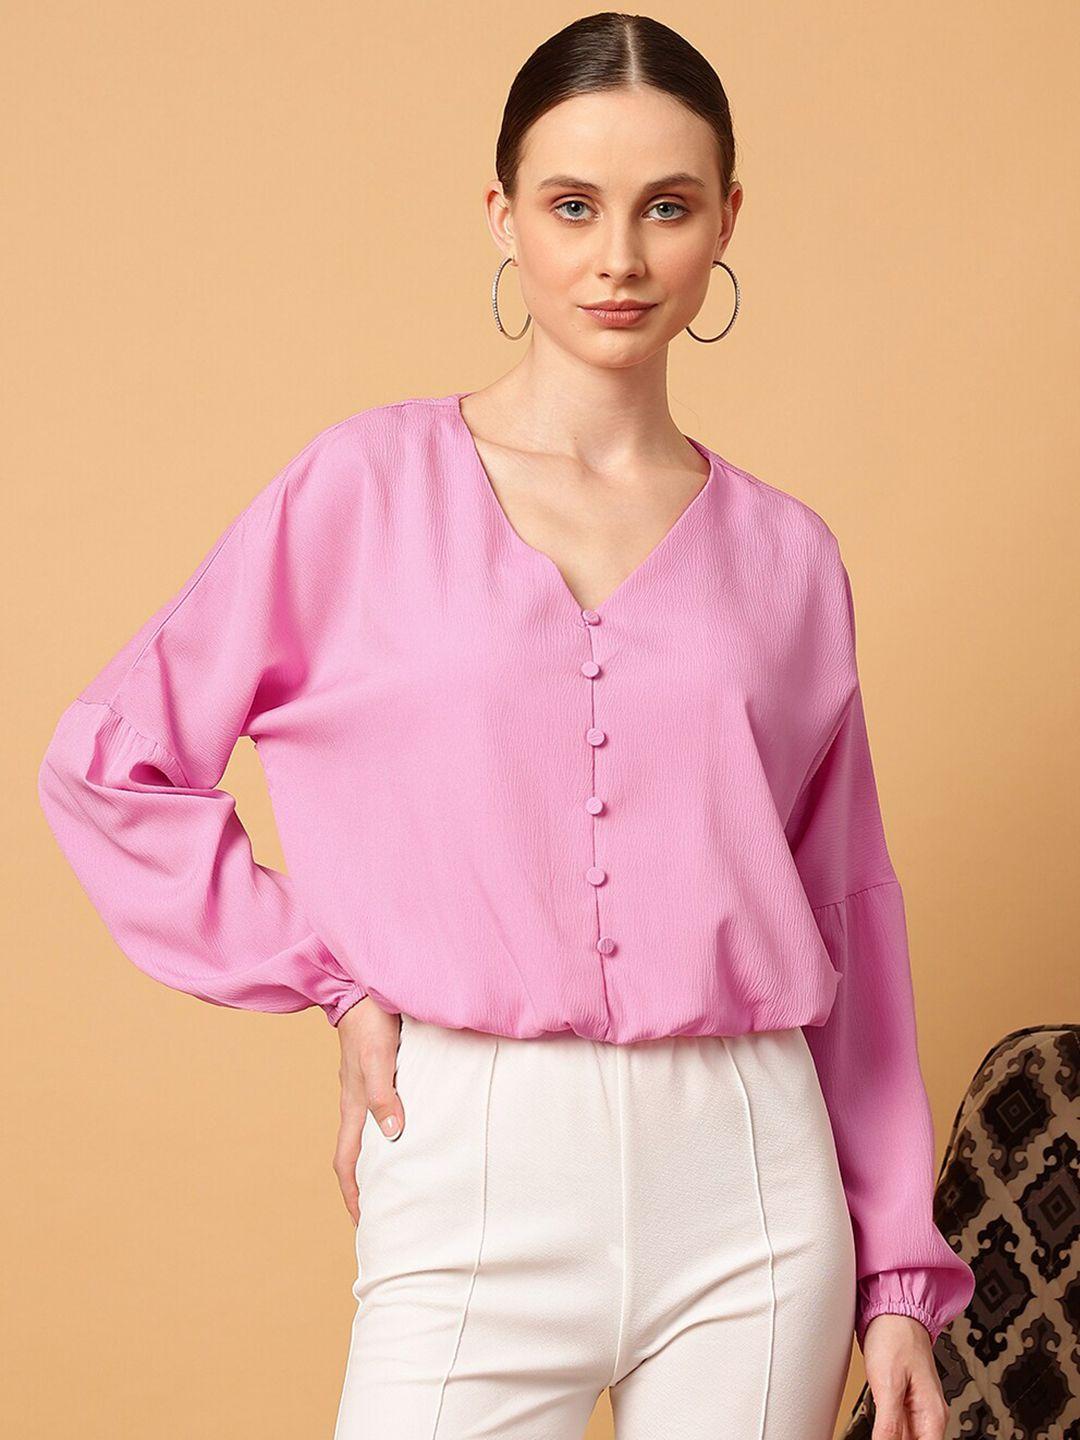 mint street v-neck extended sleeves shirt style top